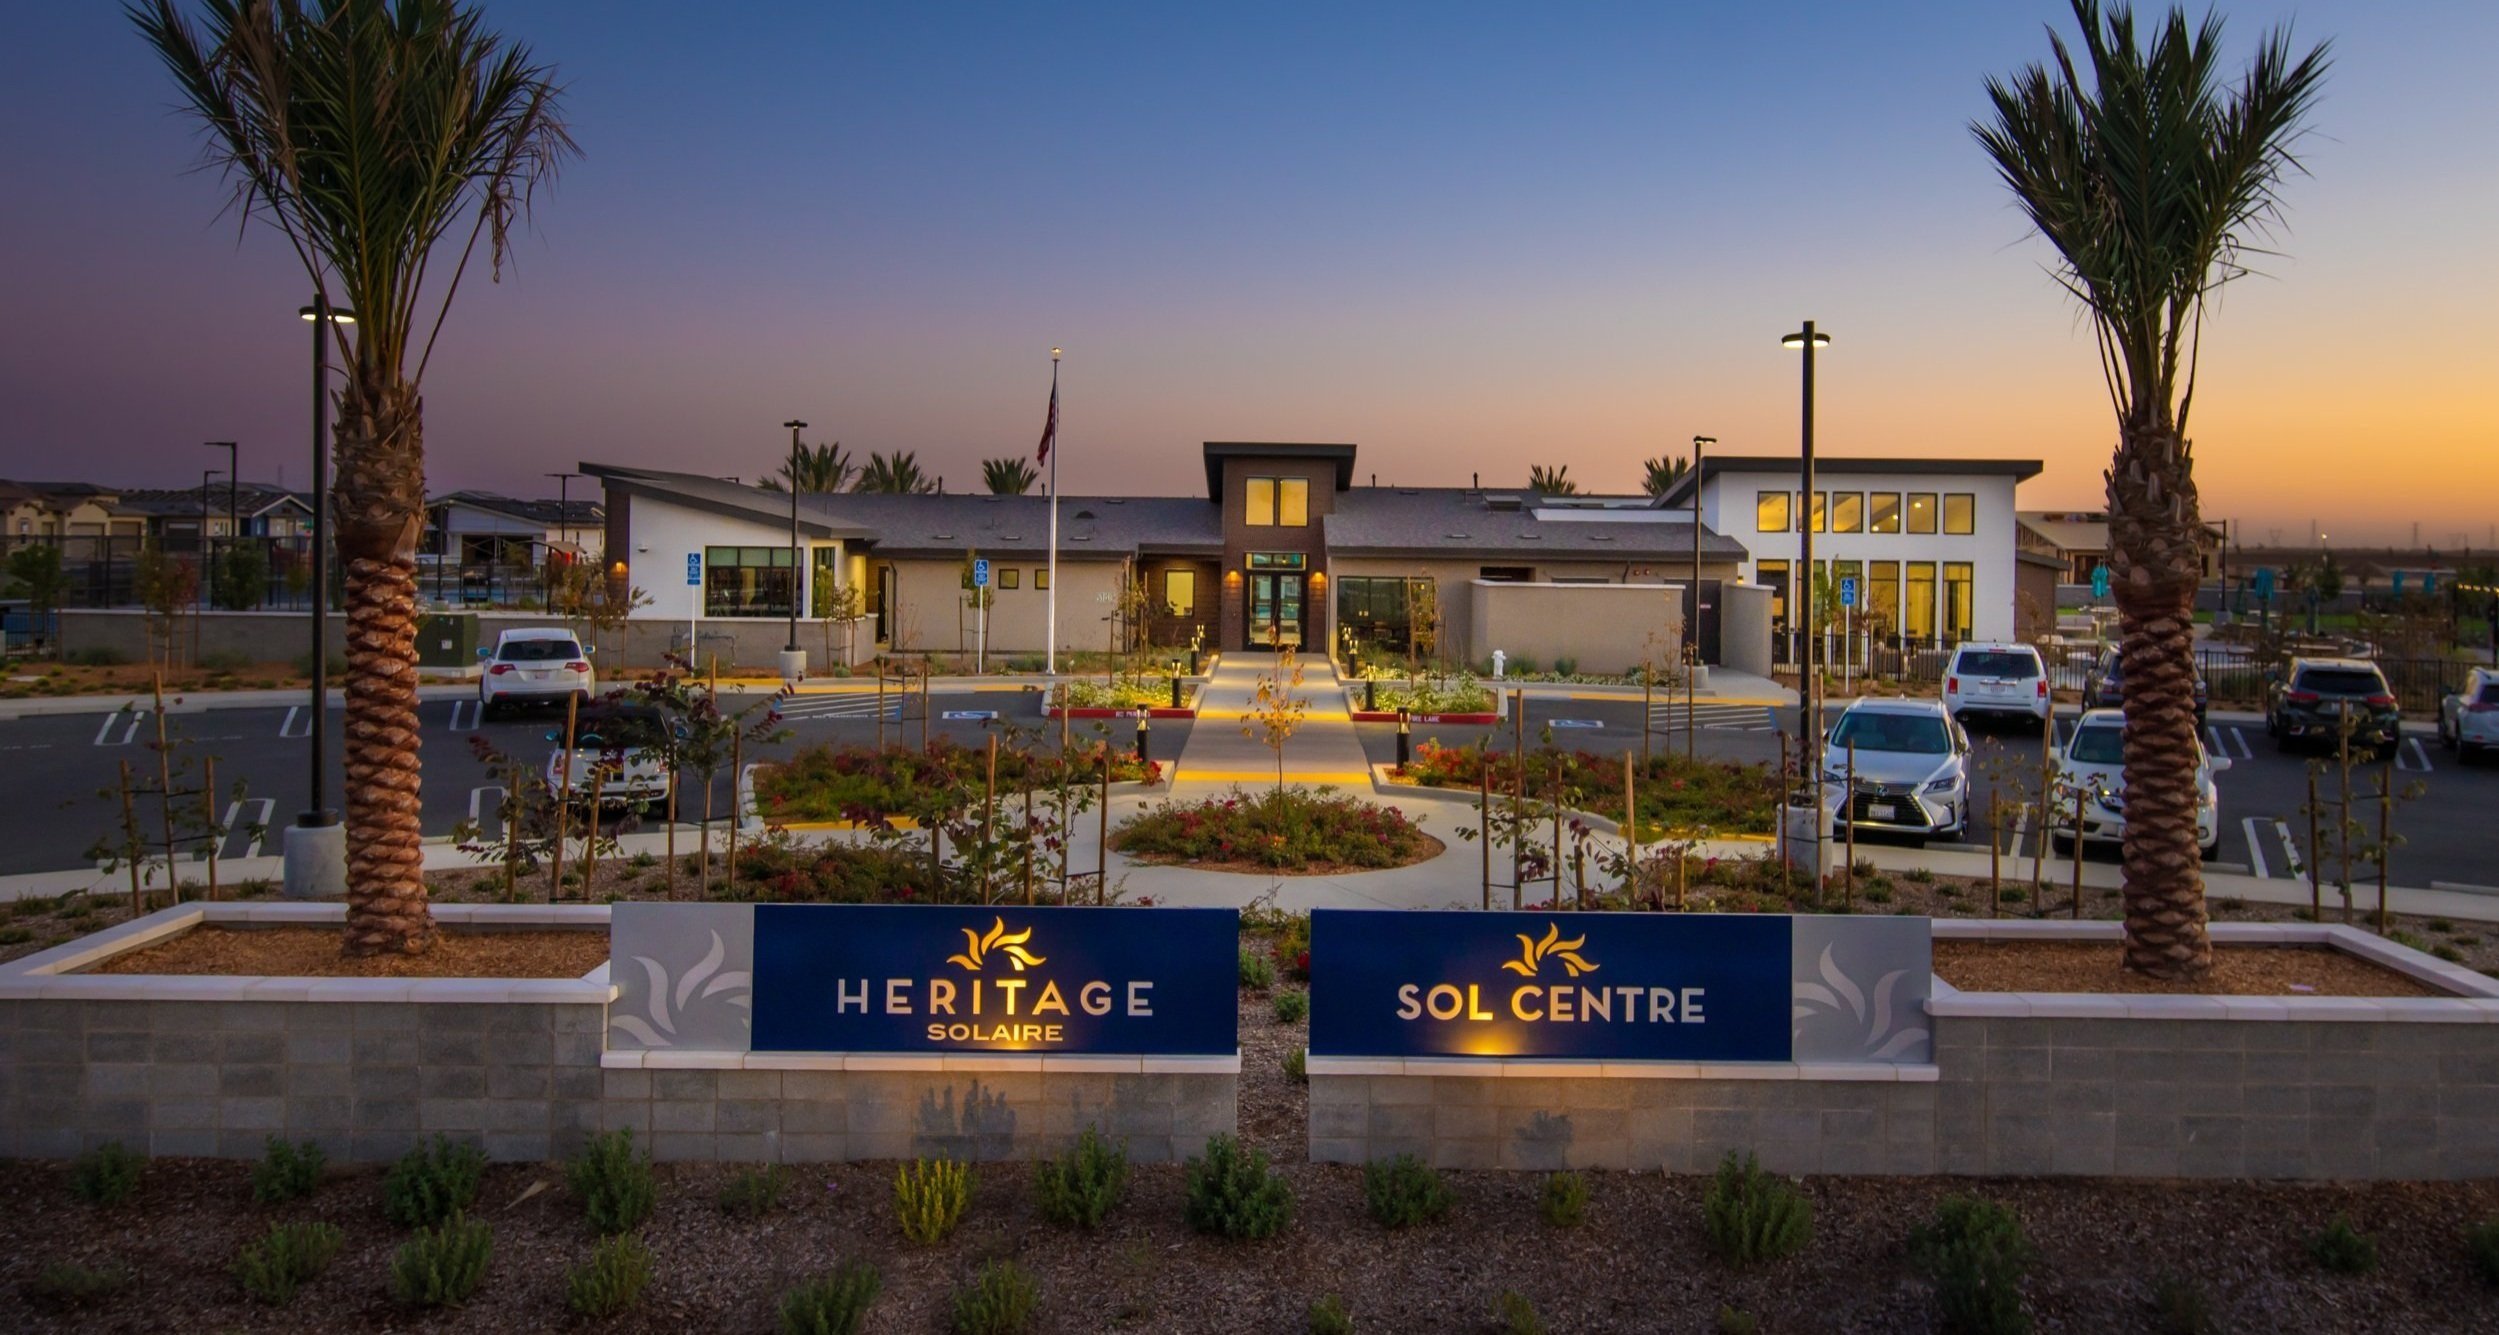 sol-centre-heritage-solaire-roseville